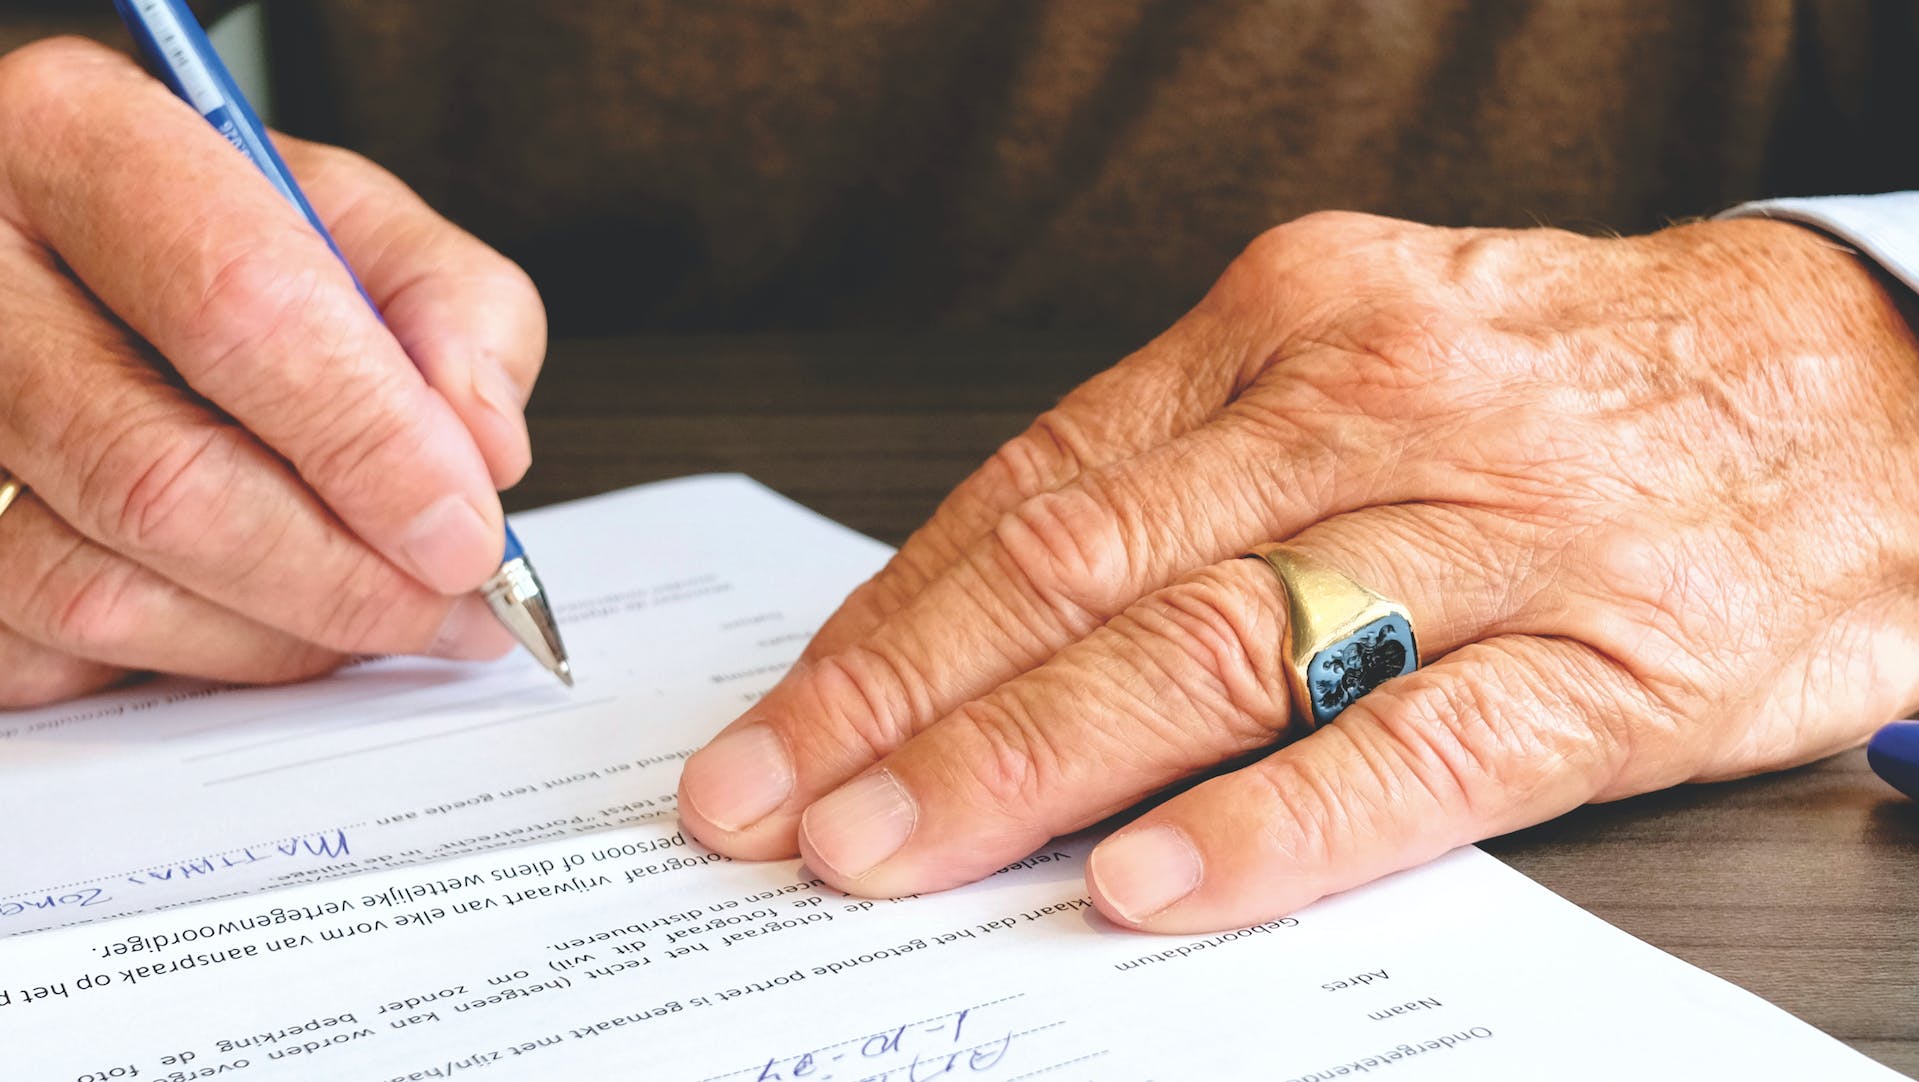 A man signing a document | Source: Pexels